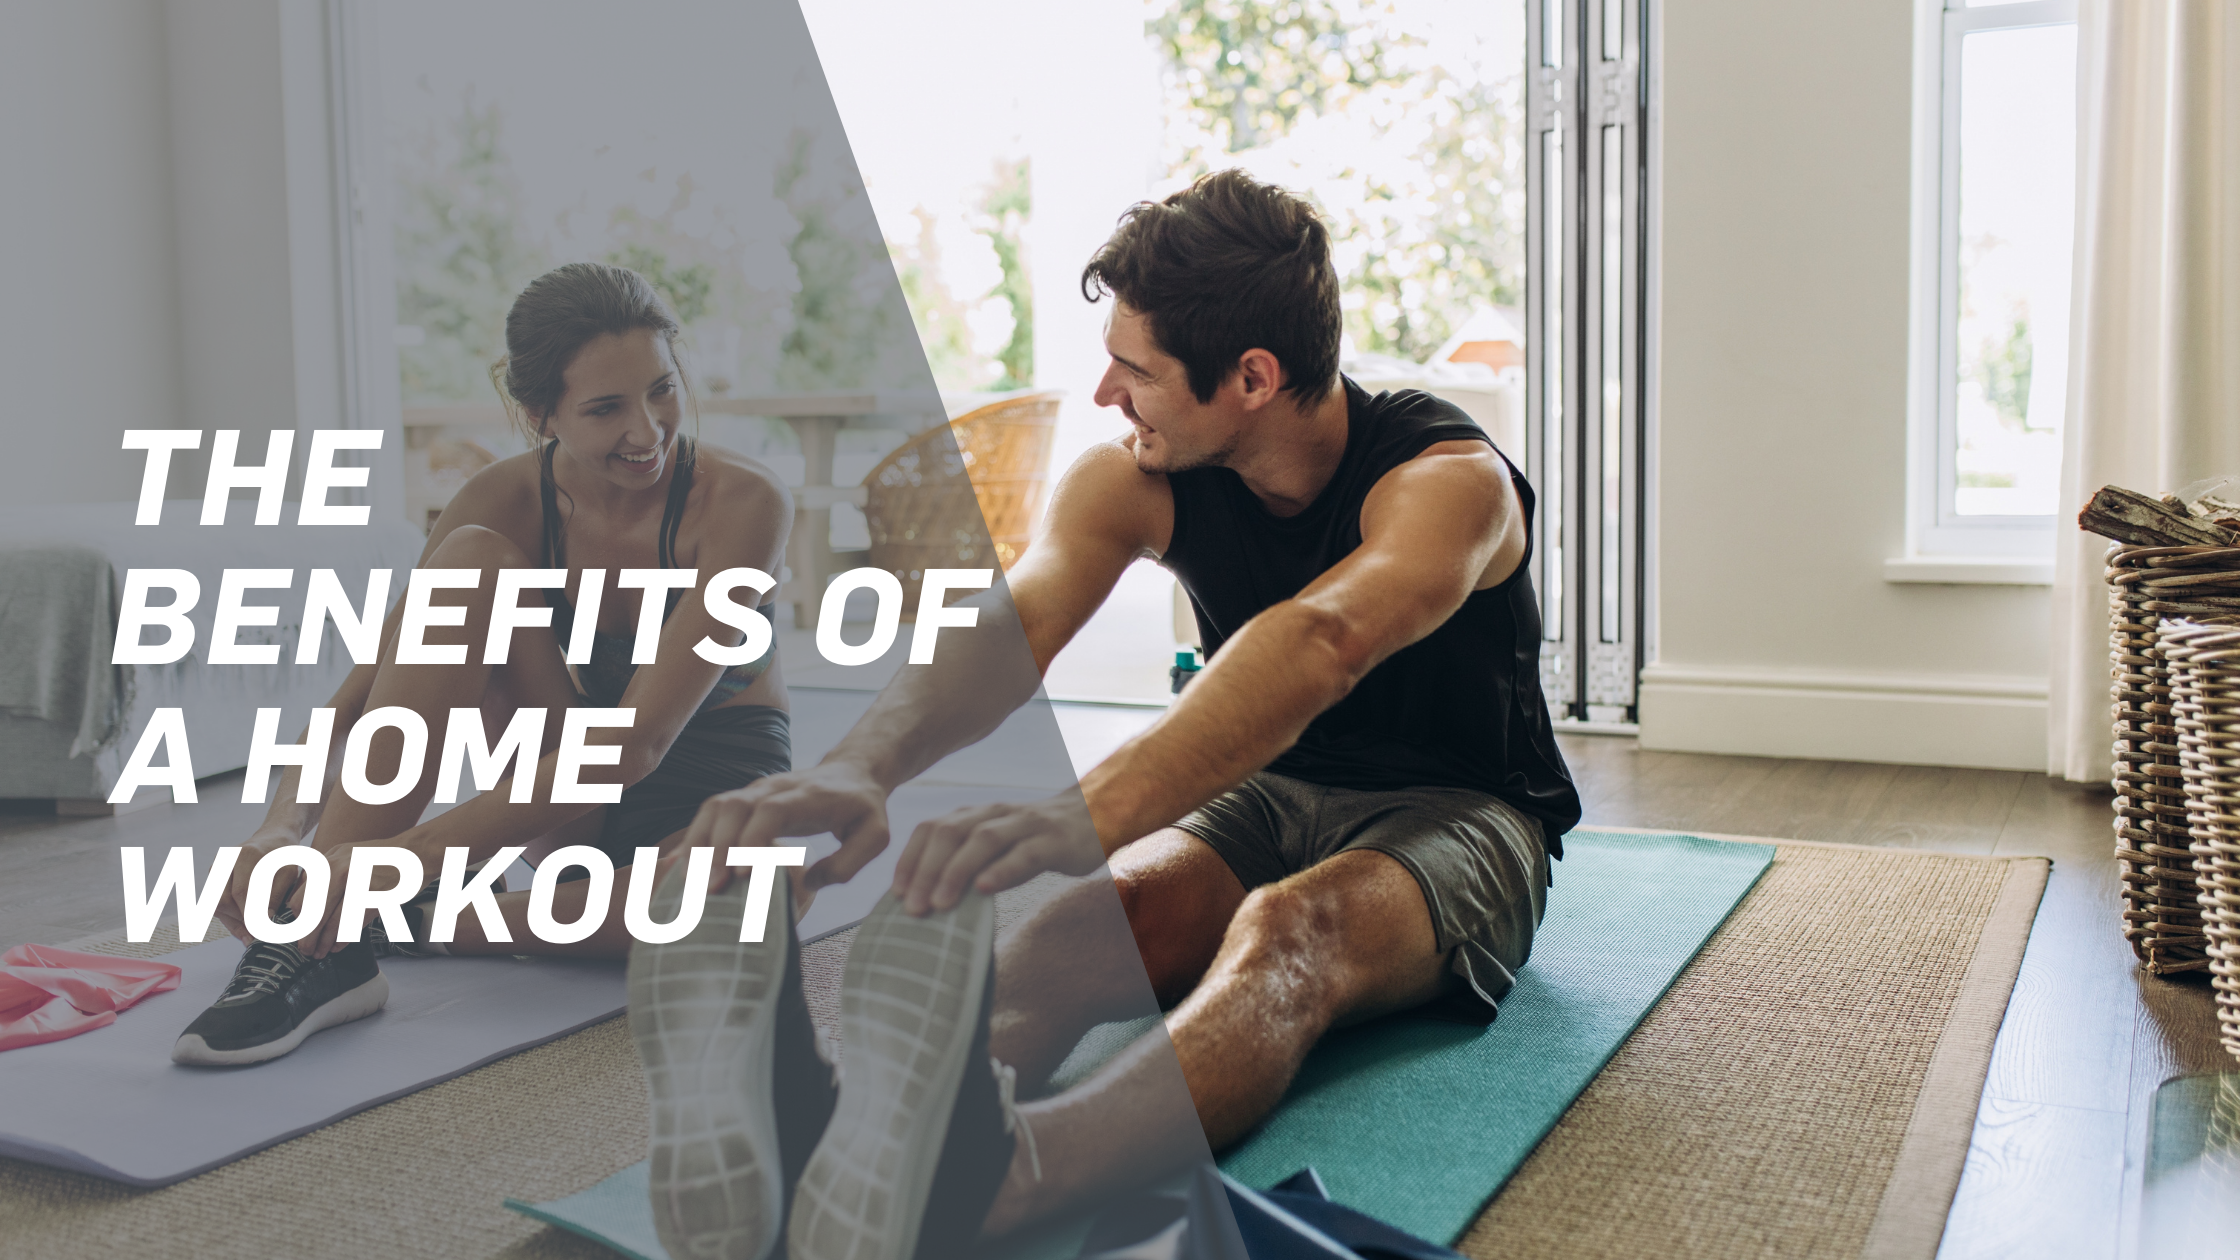 Benefits of a home-workout